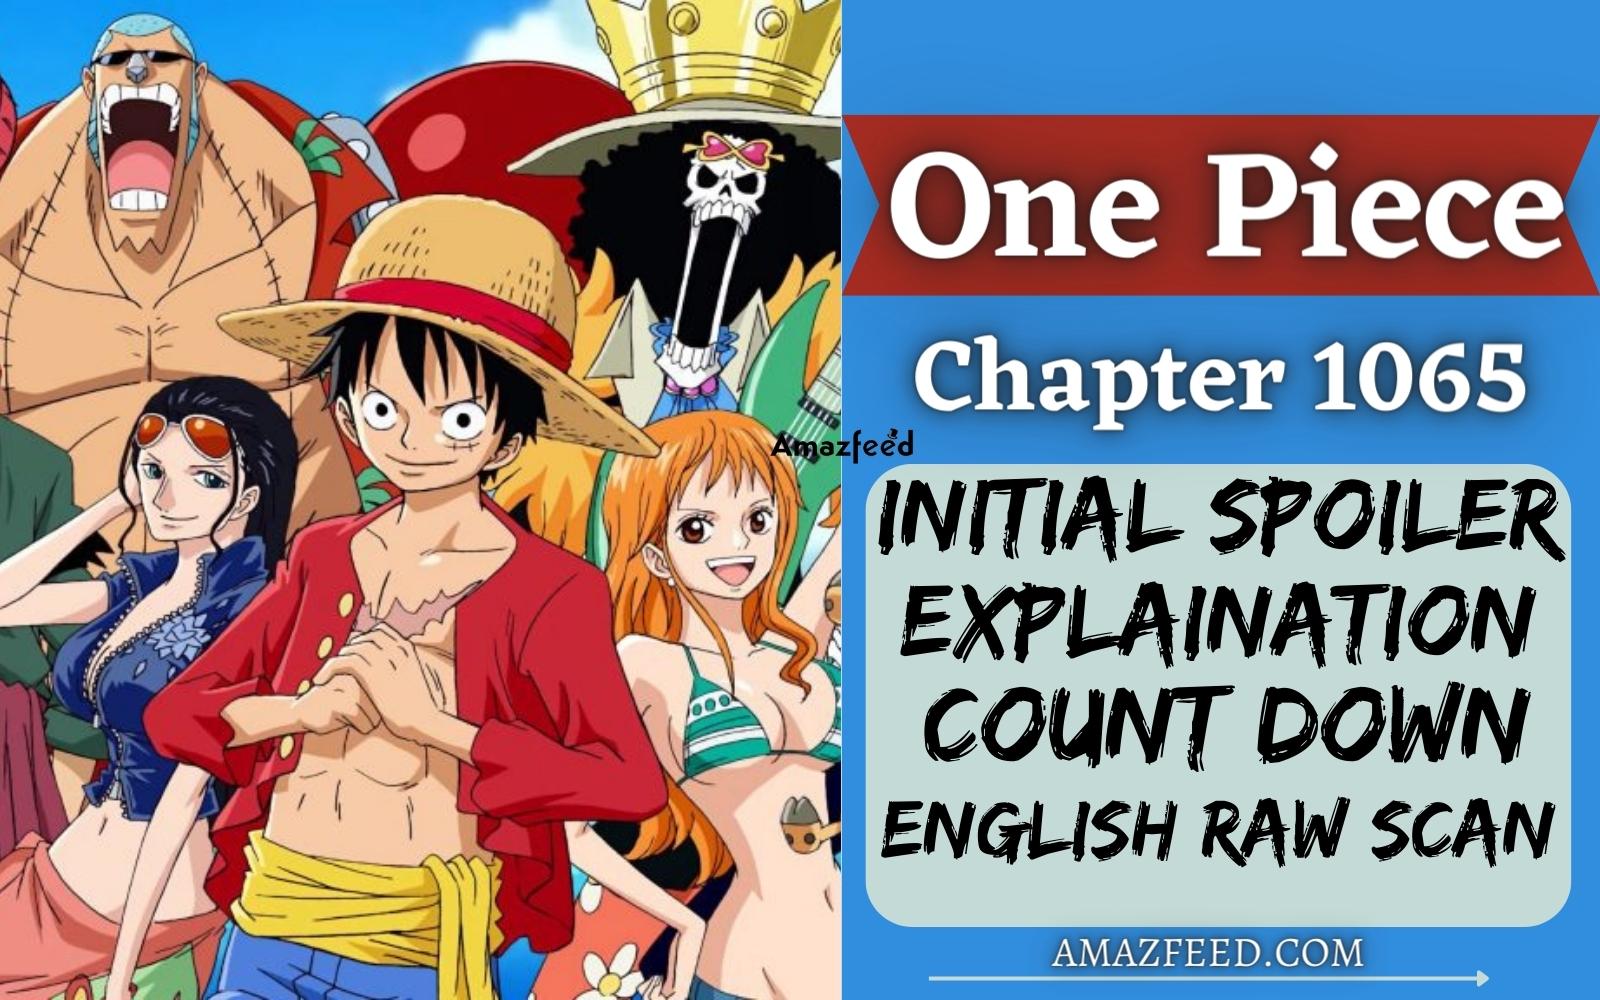 One Piece Chapter 1067 Initial Spoilers, Count Down, English Raw Scan, Release Date, & Everything You Want to Know